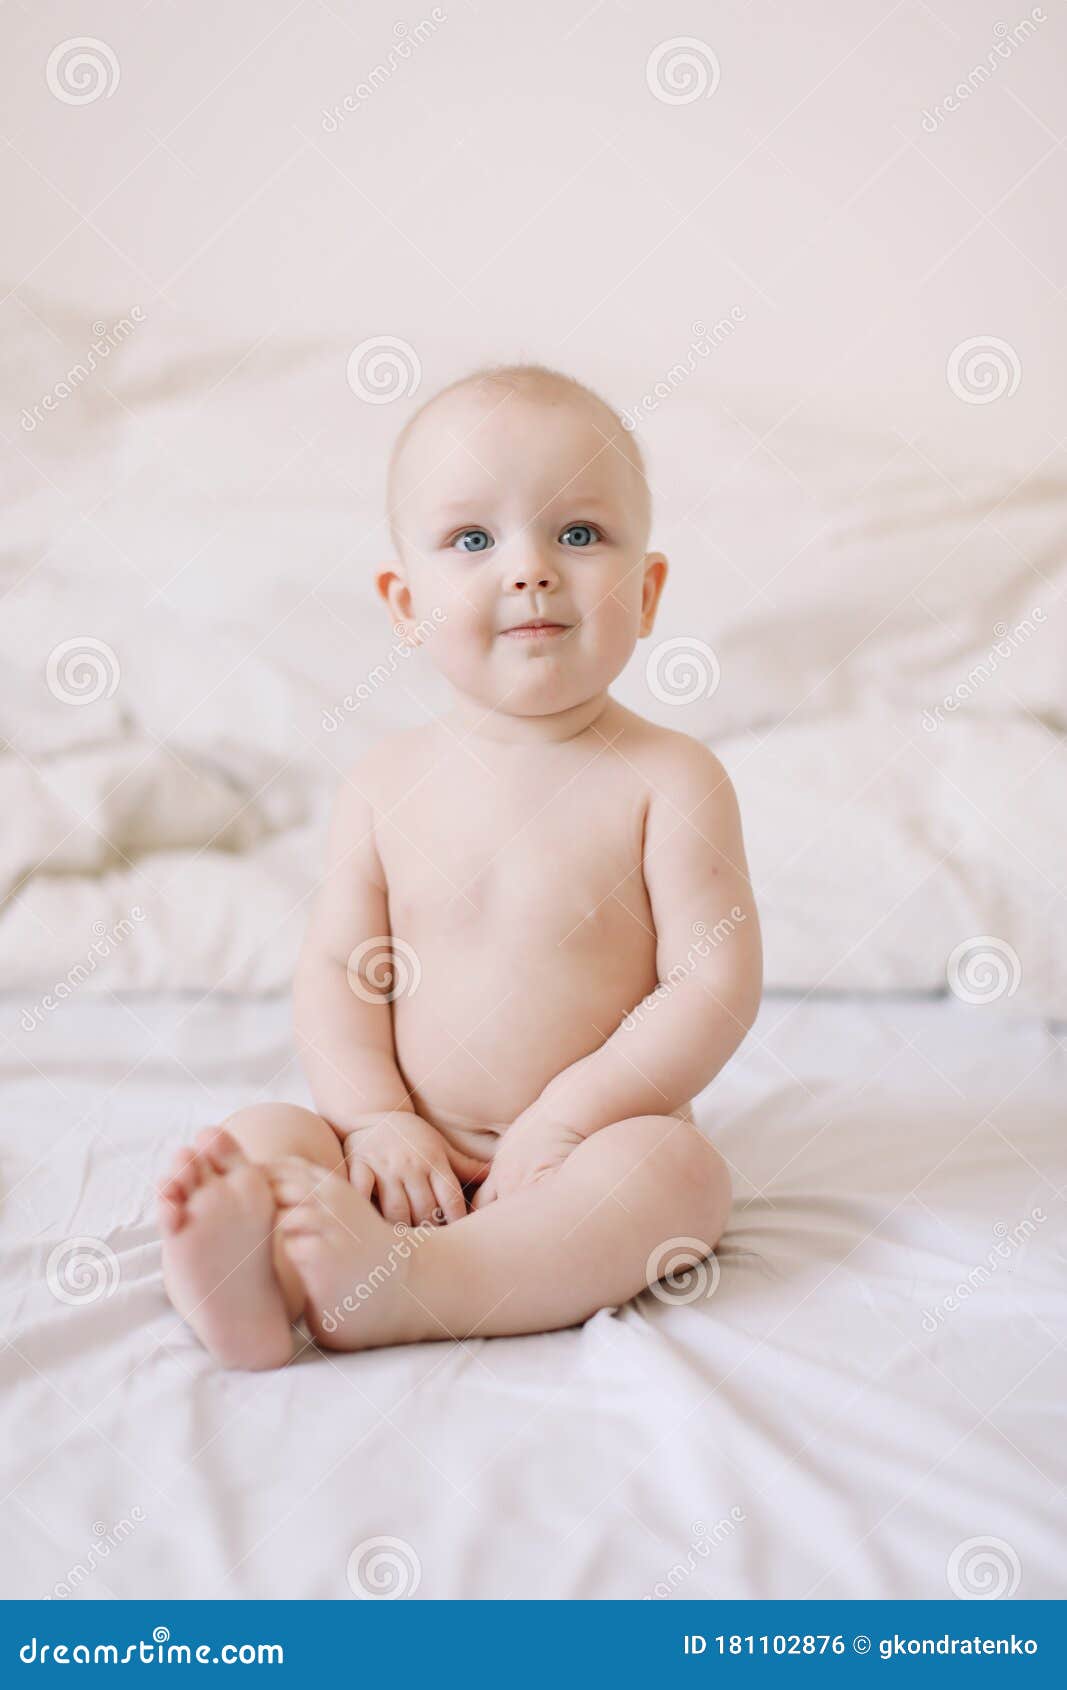 Baby In Diaper Royalty Free Stock Photo - Image: 24512585